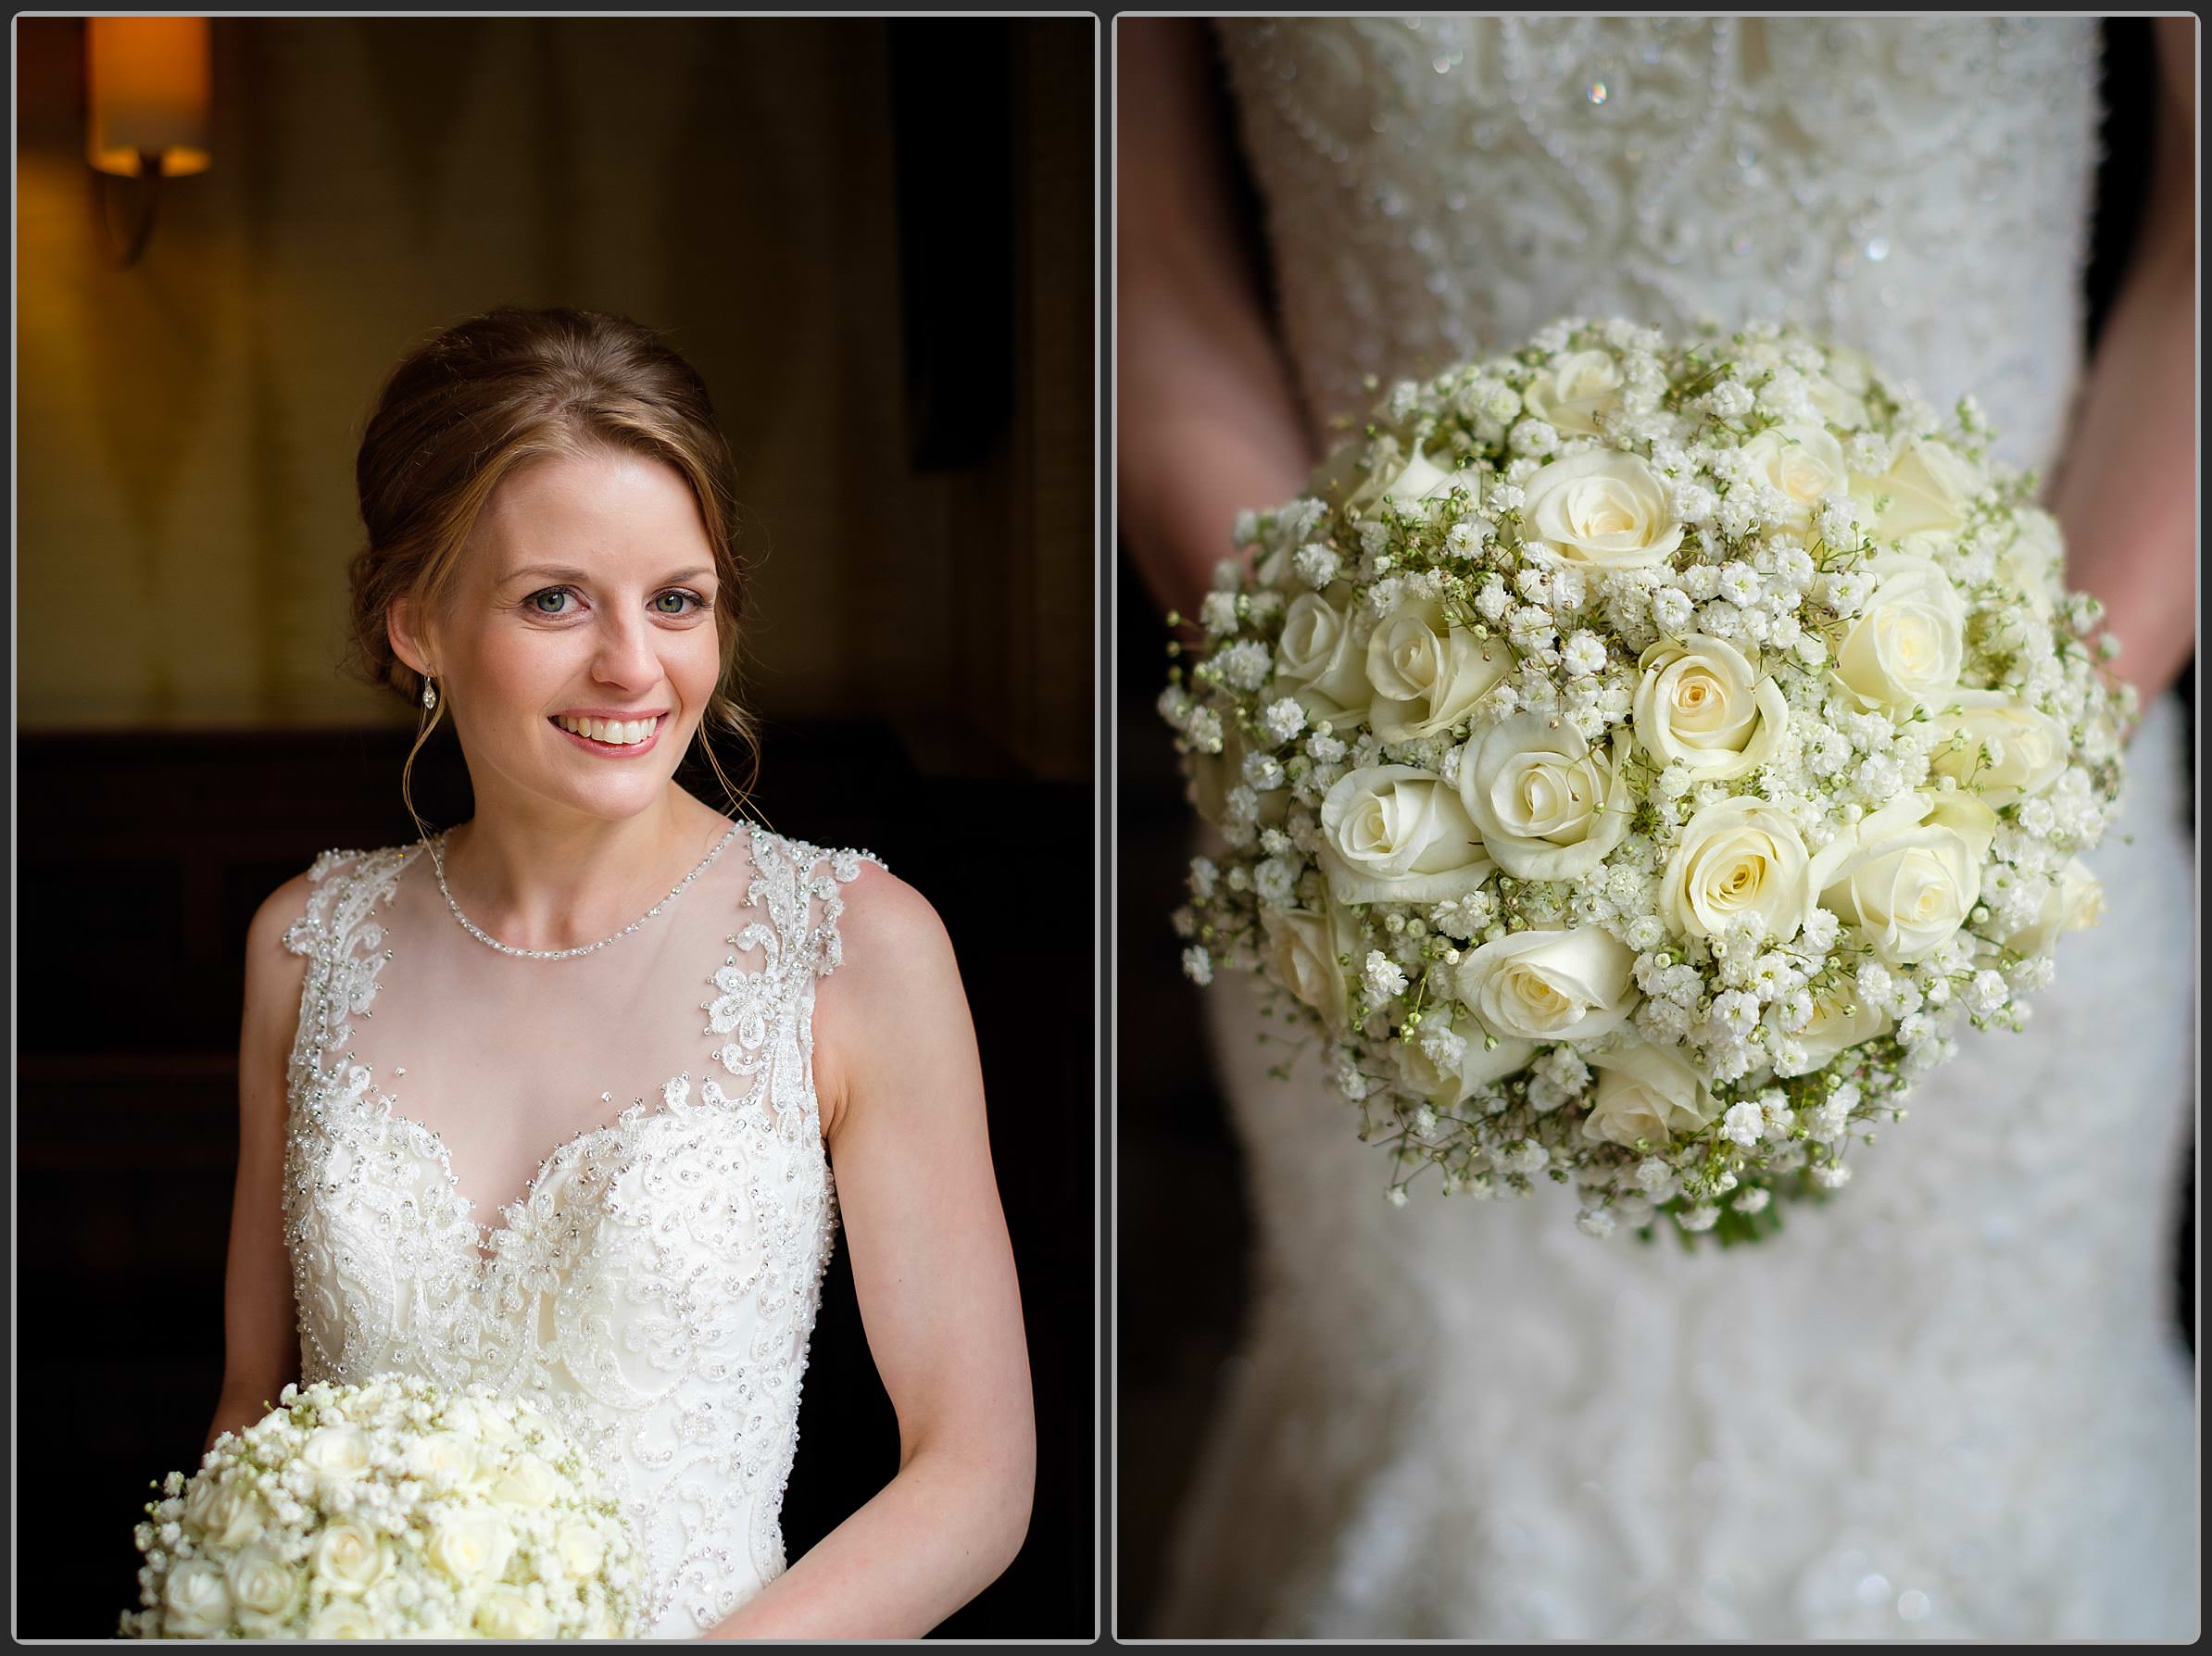 The bride at Moxhull Hall Hotel